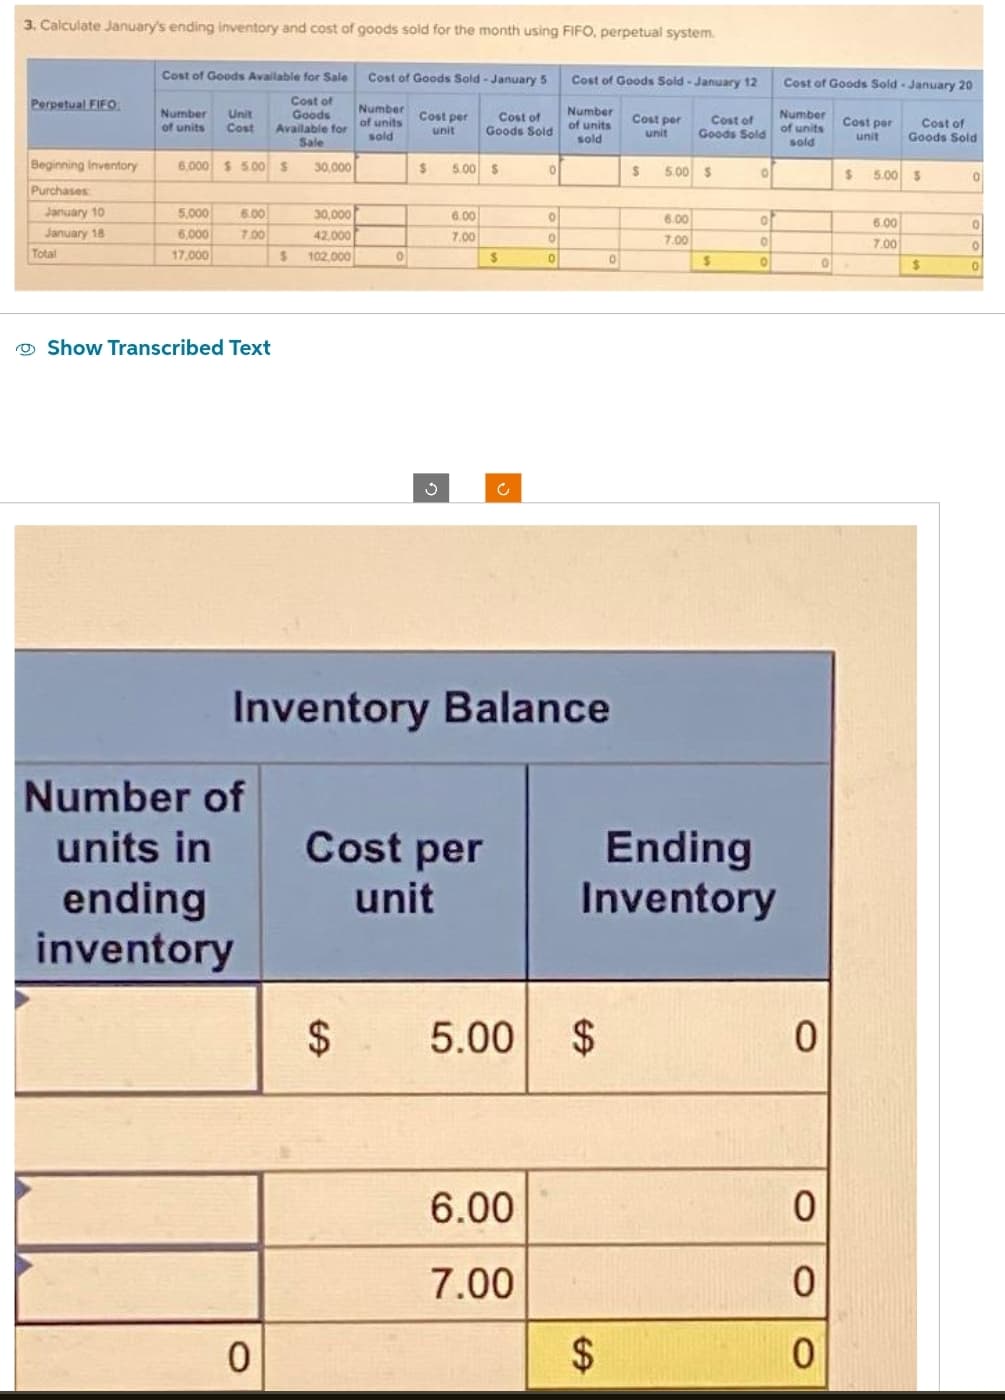 3. Calculate January's ending inventory and cost of goods sold for the month using FIFO, perpetual system.
Perpetual FIFO
Beginning Inventory
Purchases
January 10
January 18
Total
Cost of Goods Available for Sale
Cost of
Goods
Available for
Sale
Number Unit
of units
Cost
6,000 $5.00 $
5,000
6,000
17,000
6.00
7.00
Show Transcribed Text
Number of
units in
ending
inventory
$
0
30,000
30,000
42.000
102,000
Cost of Goods Sold-January 5 Cost of Goods Sold-January 12
Number
of units
sold
Number
of units
sold
0
Cost per
unit
$
Ű
Cost of
Goods Sold
5.00 $
6.00
7.00
$
Inventory Balance
Cost per
unit
0
0
0
0
6.00
7.00
$ 5.00 $
0
$
Cost per
unit
$
Cost of
Goods Sold
5.00 $
6.00
7.00
S
O
Ending
Inventory
of
O
0
Cost of Goods Sold-January 20
Number
of units
sold
0
Cost per
unit
0
0
0
$
0.
Cost of
Goods Sold
5.00 $
6.00
7.00
$
0
0
0